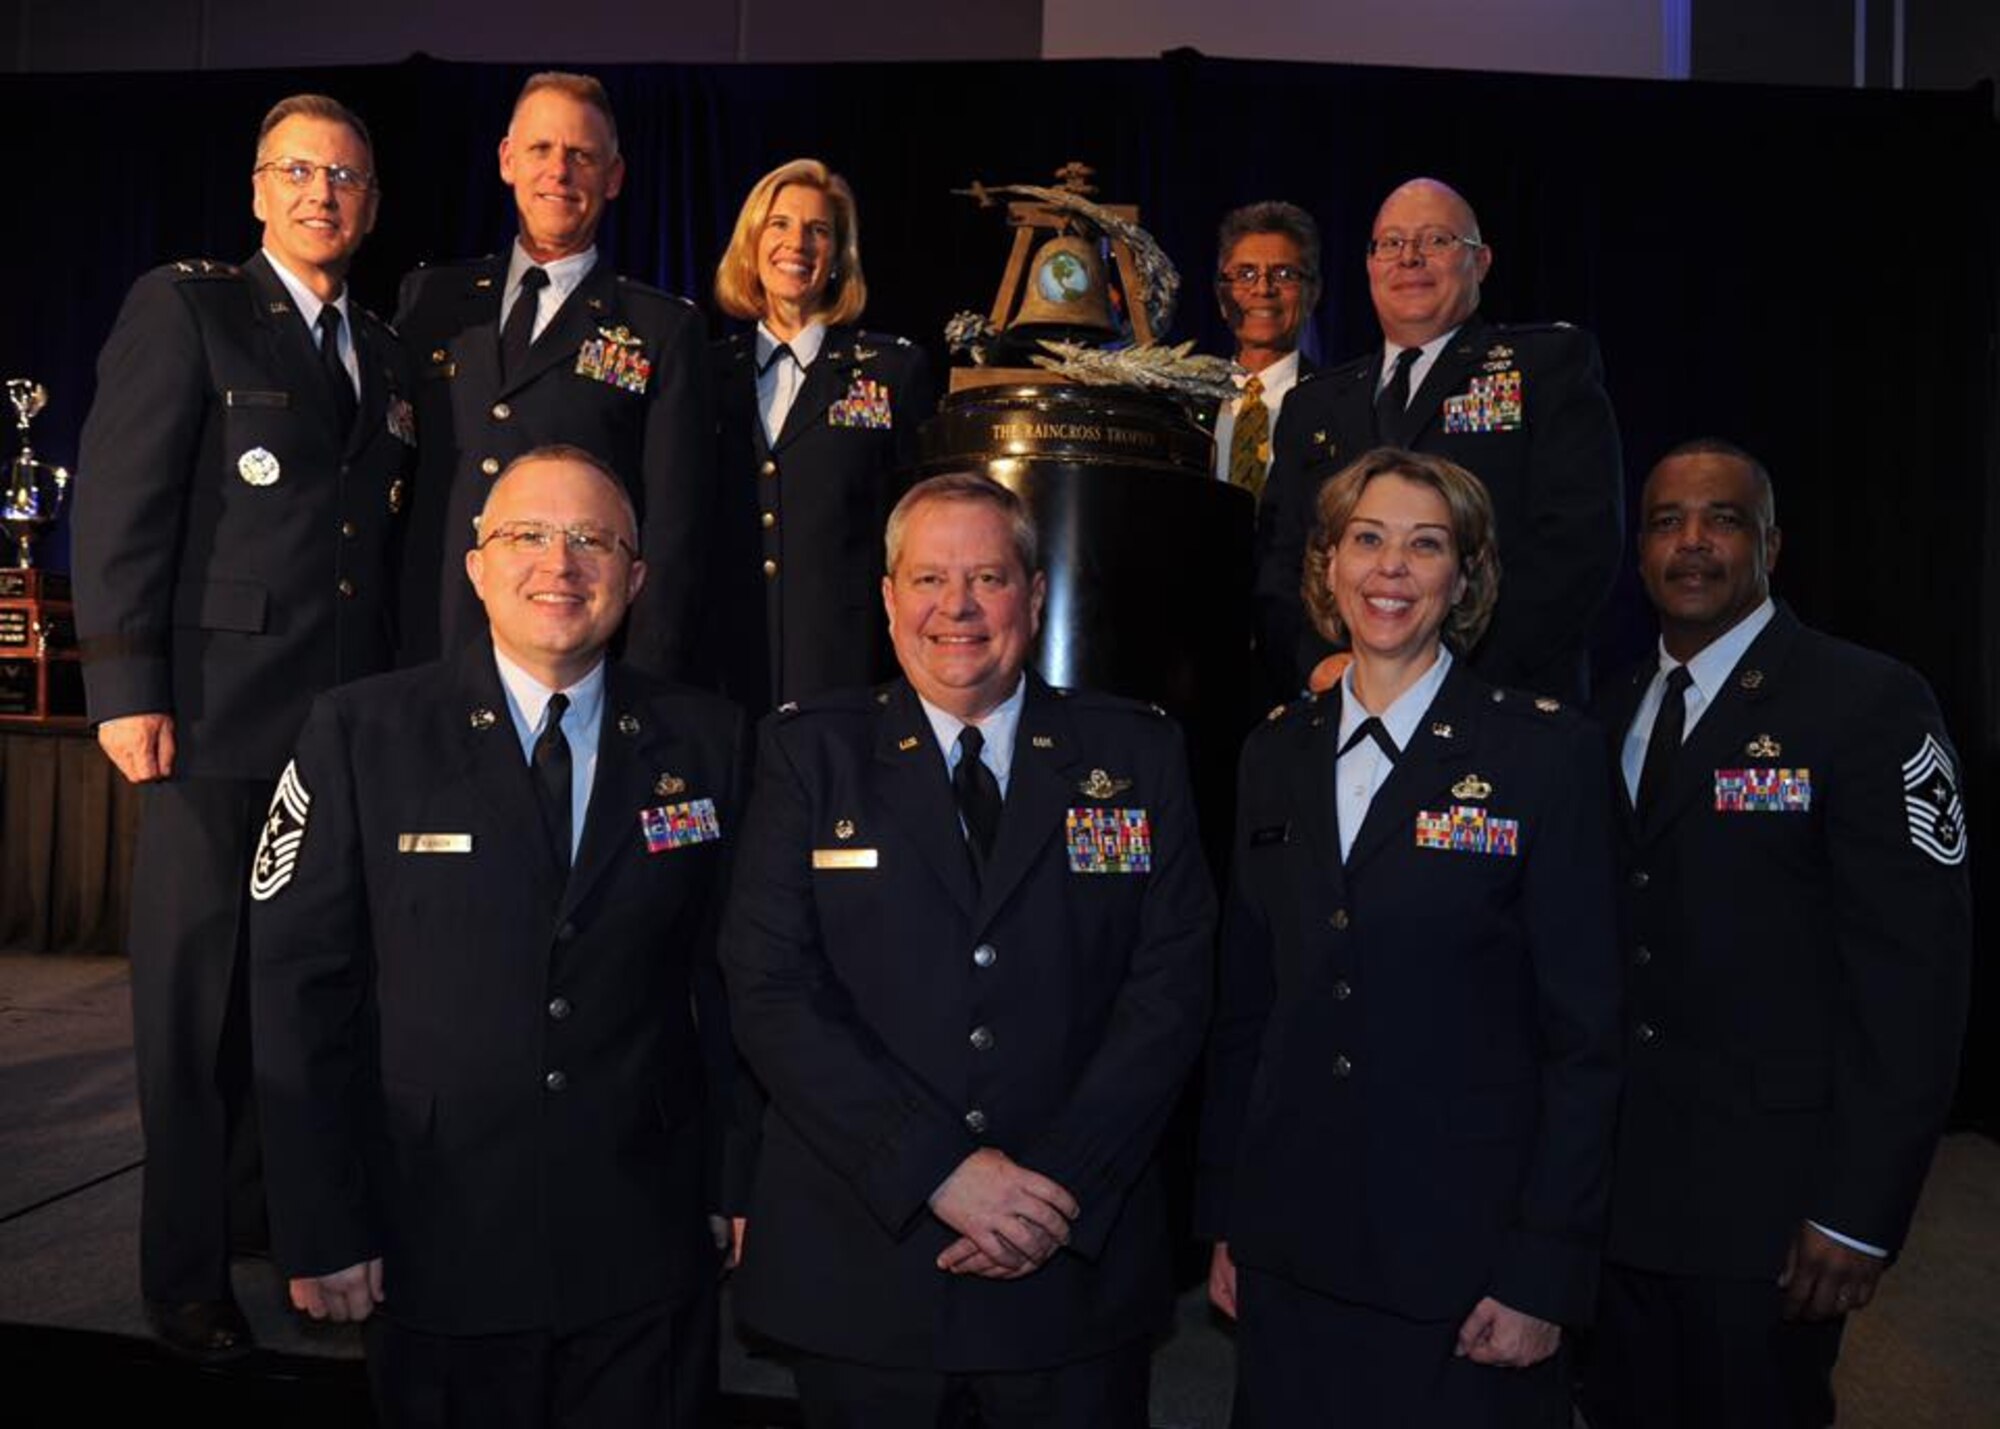 Maj. Gen. Randall Ogden, 4th Air Force commander, and Col. Larry Shaw, 434th Air Refueling Wing commander, along with command staff from Grissom Air Reserve Base, pose with the Raincross Trophy at March Air Reserve Base, Nov. 21, 2018. The 434th ARW was awarded the Raincross Trophy for distinguishing itself as the best unit in 4th Air Force between Oct. 2017 and Sept. 2018. (U.S. Air Force photo)